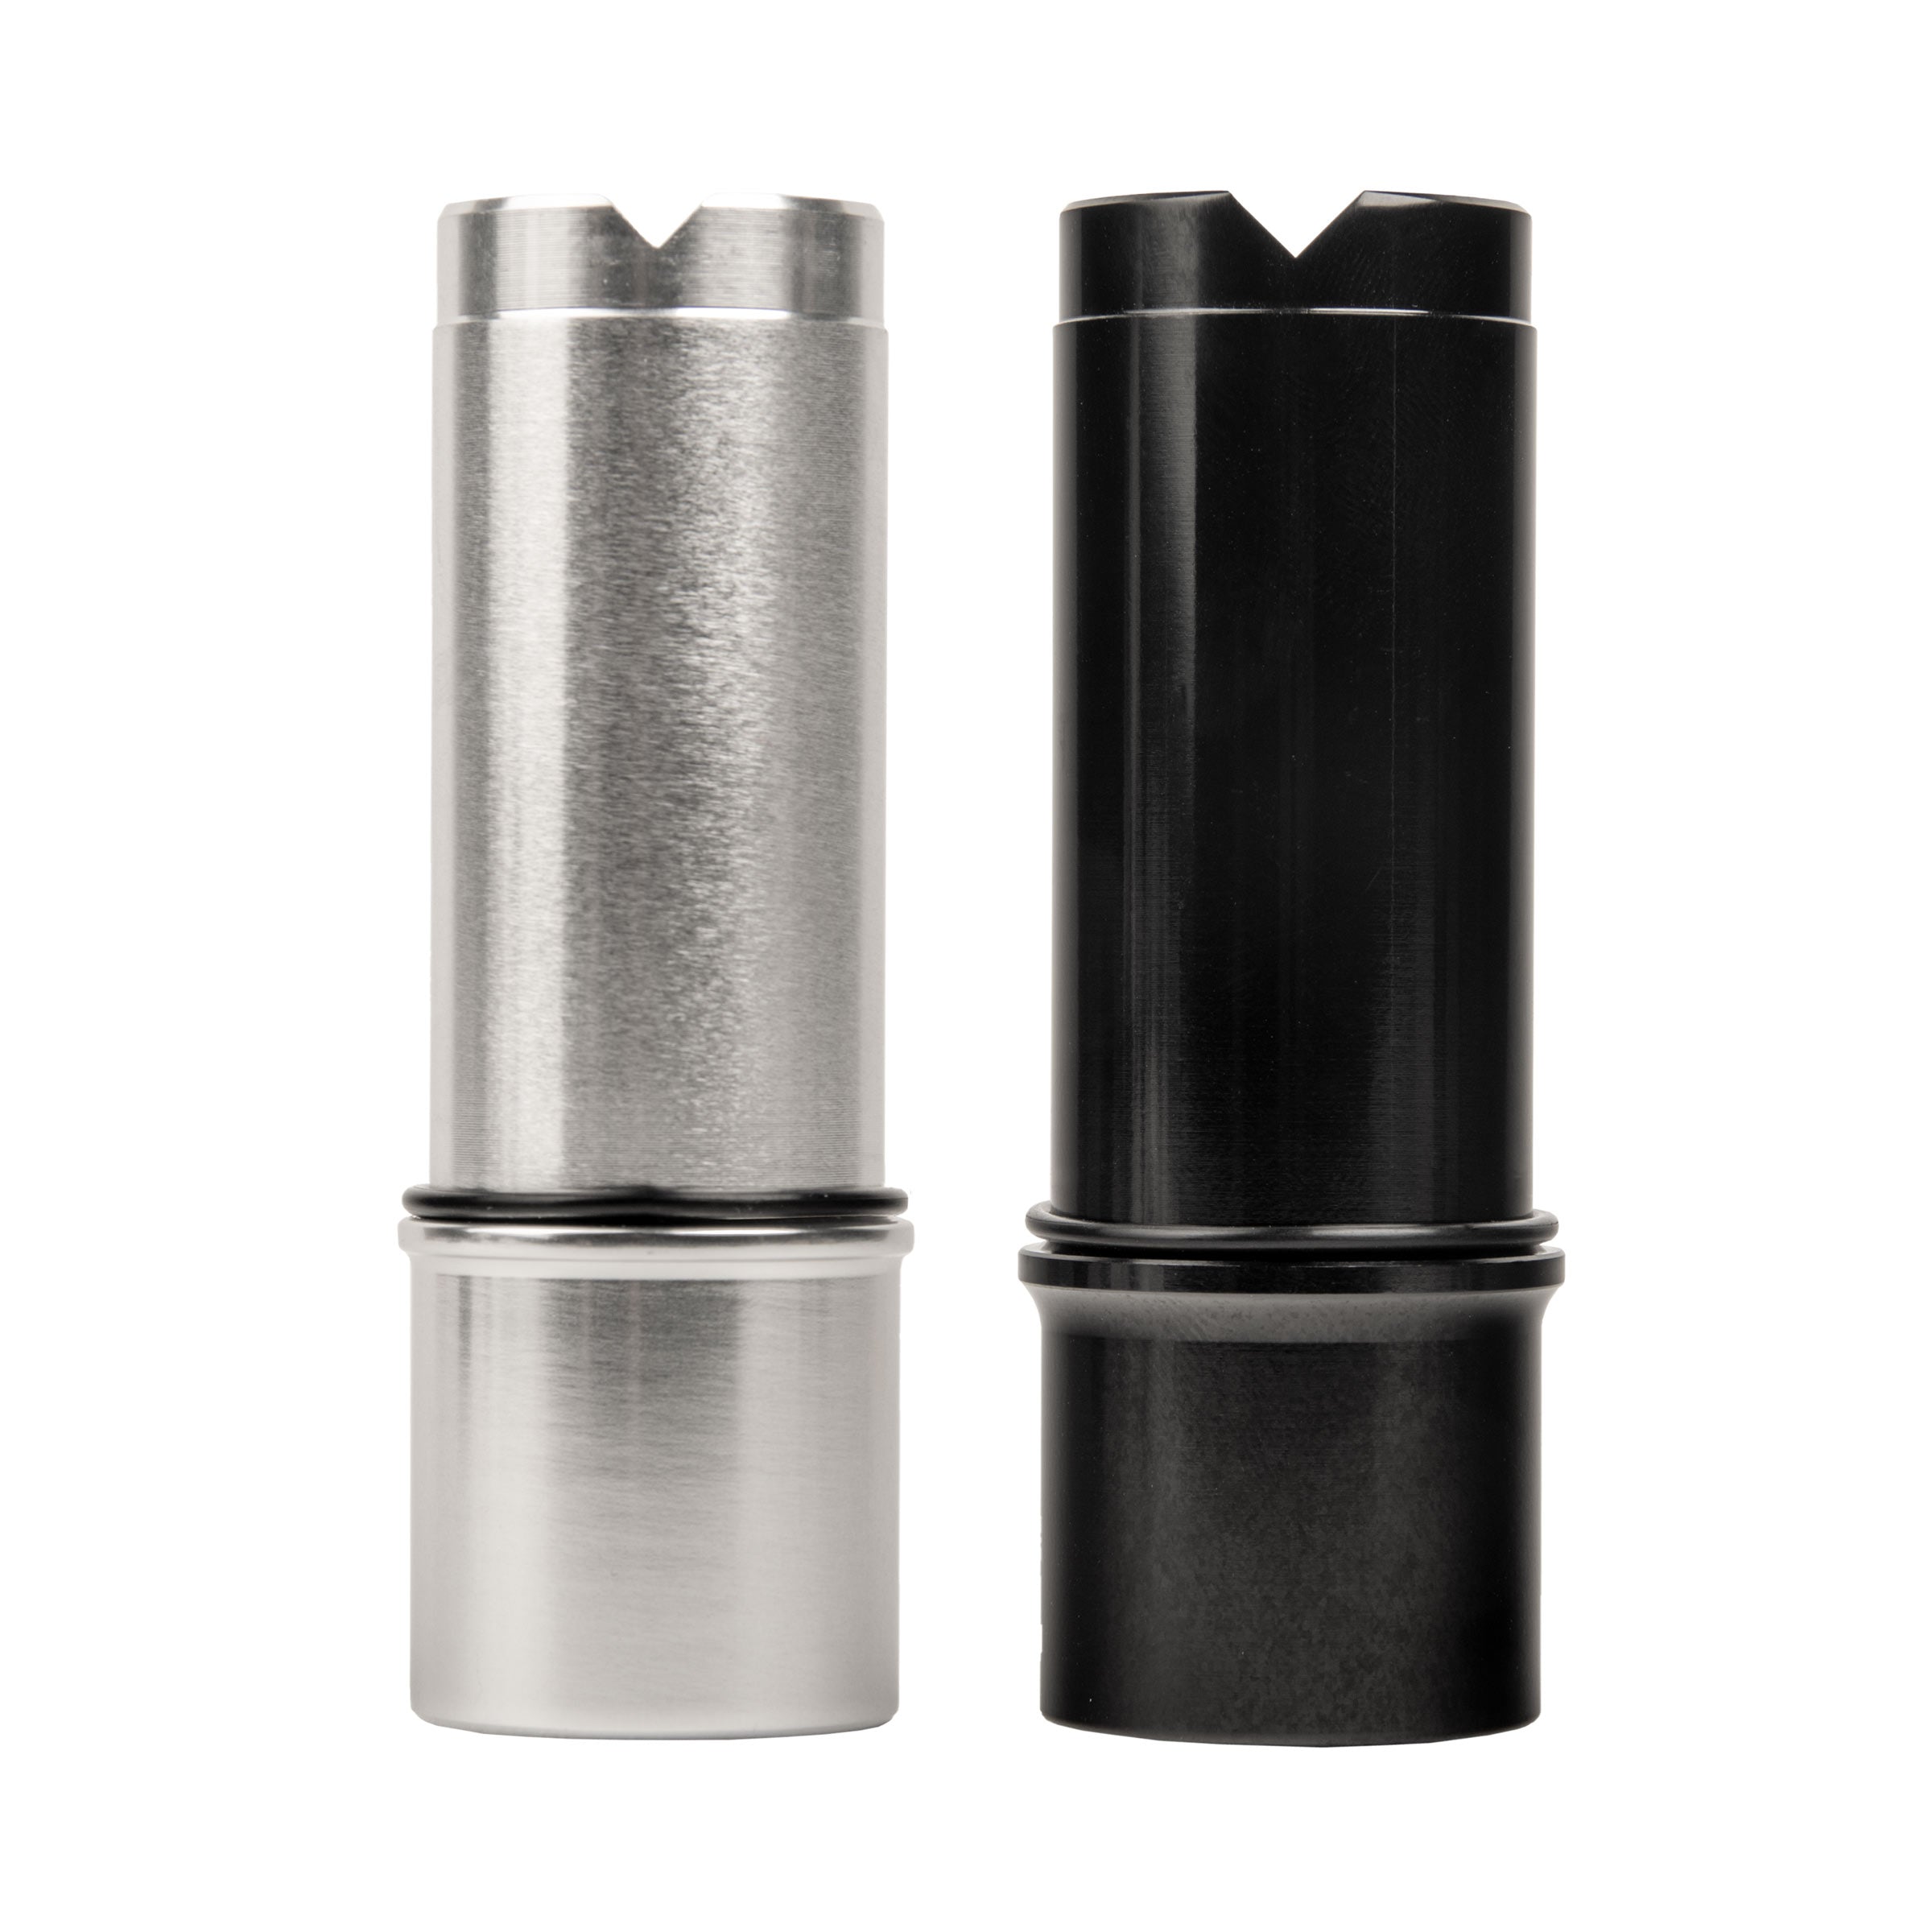 American Tackle Ferrule for Aluminum Butts